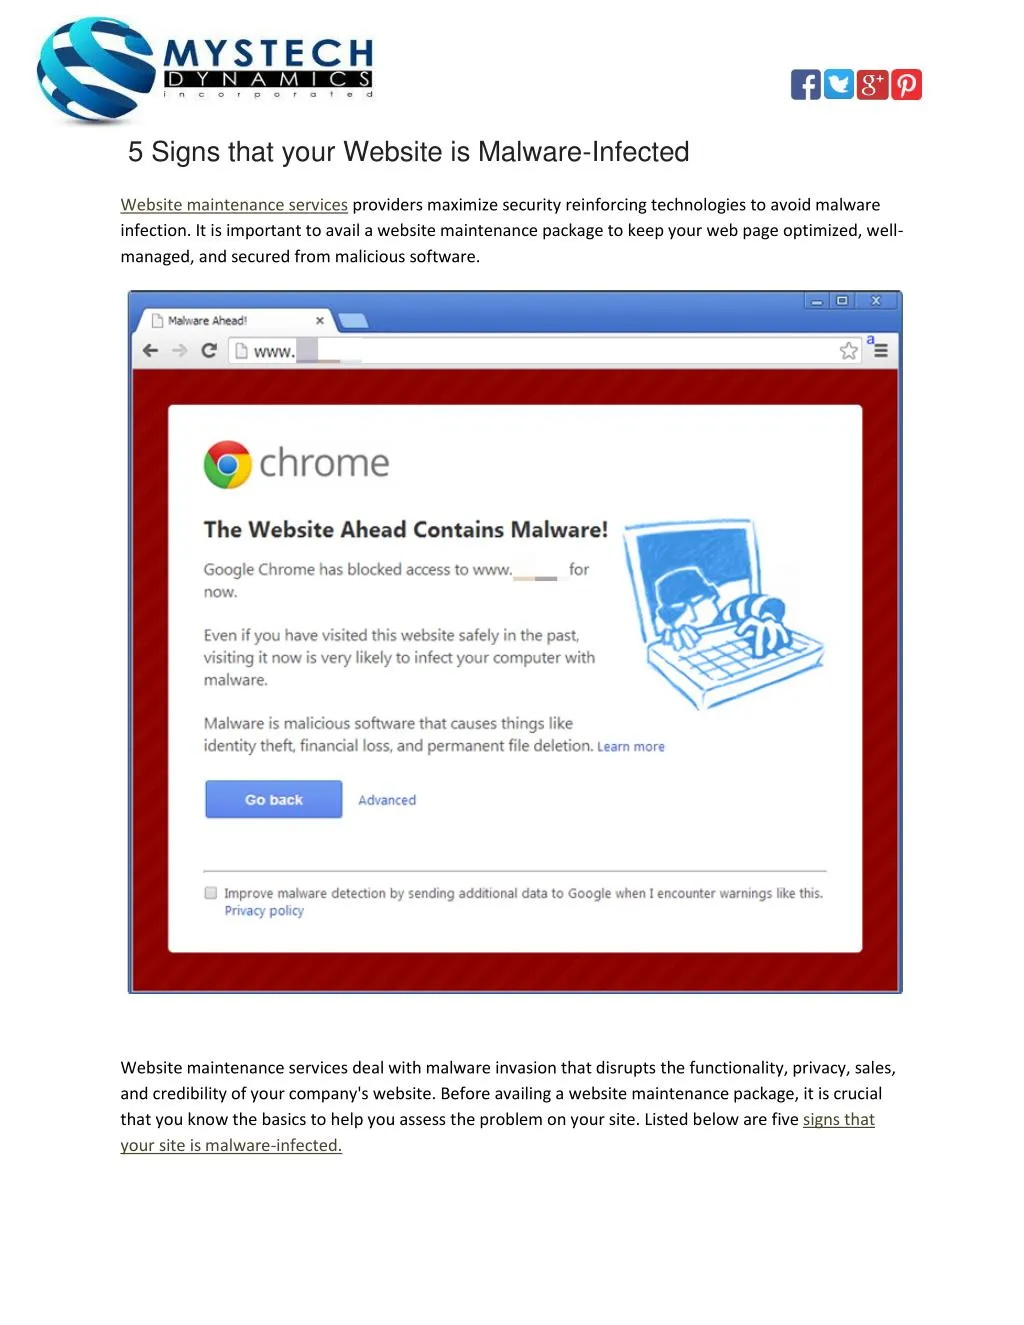 5 signs that your website is malware infected